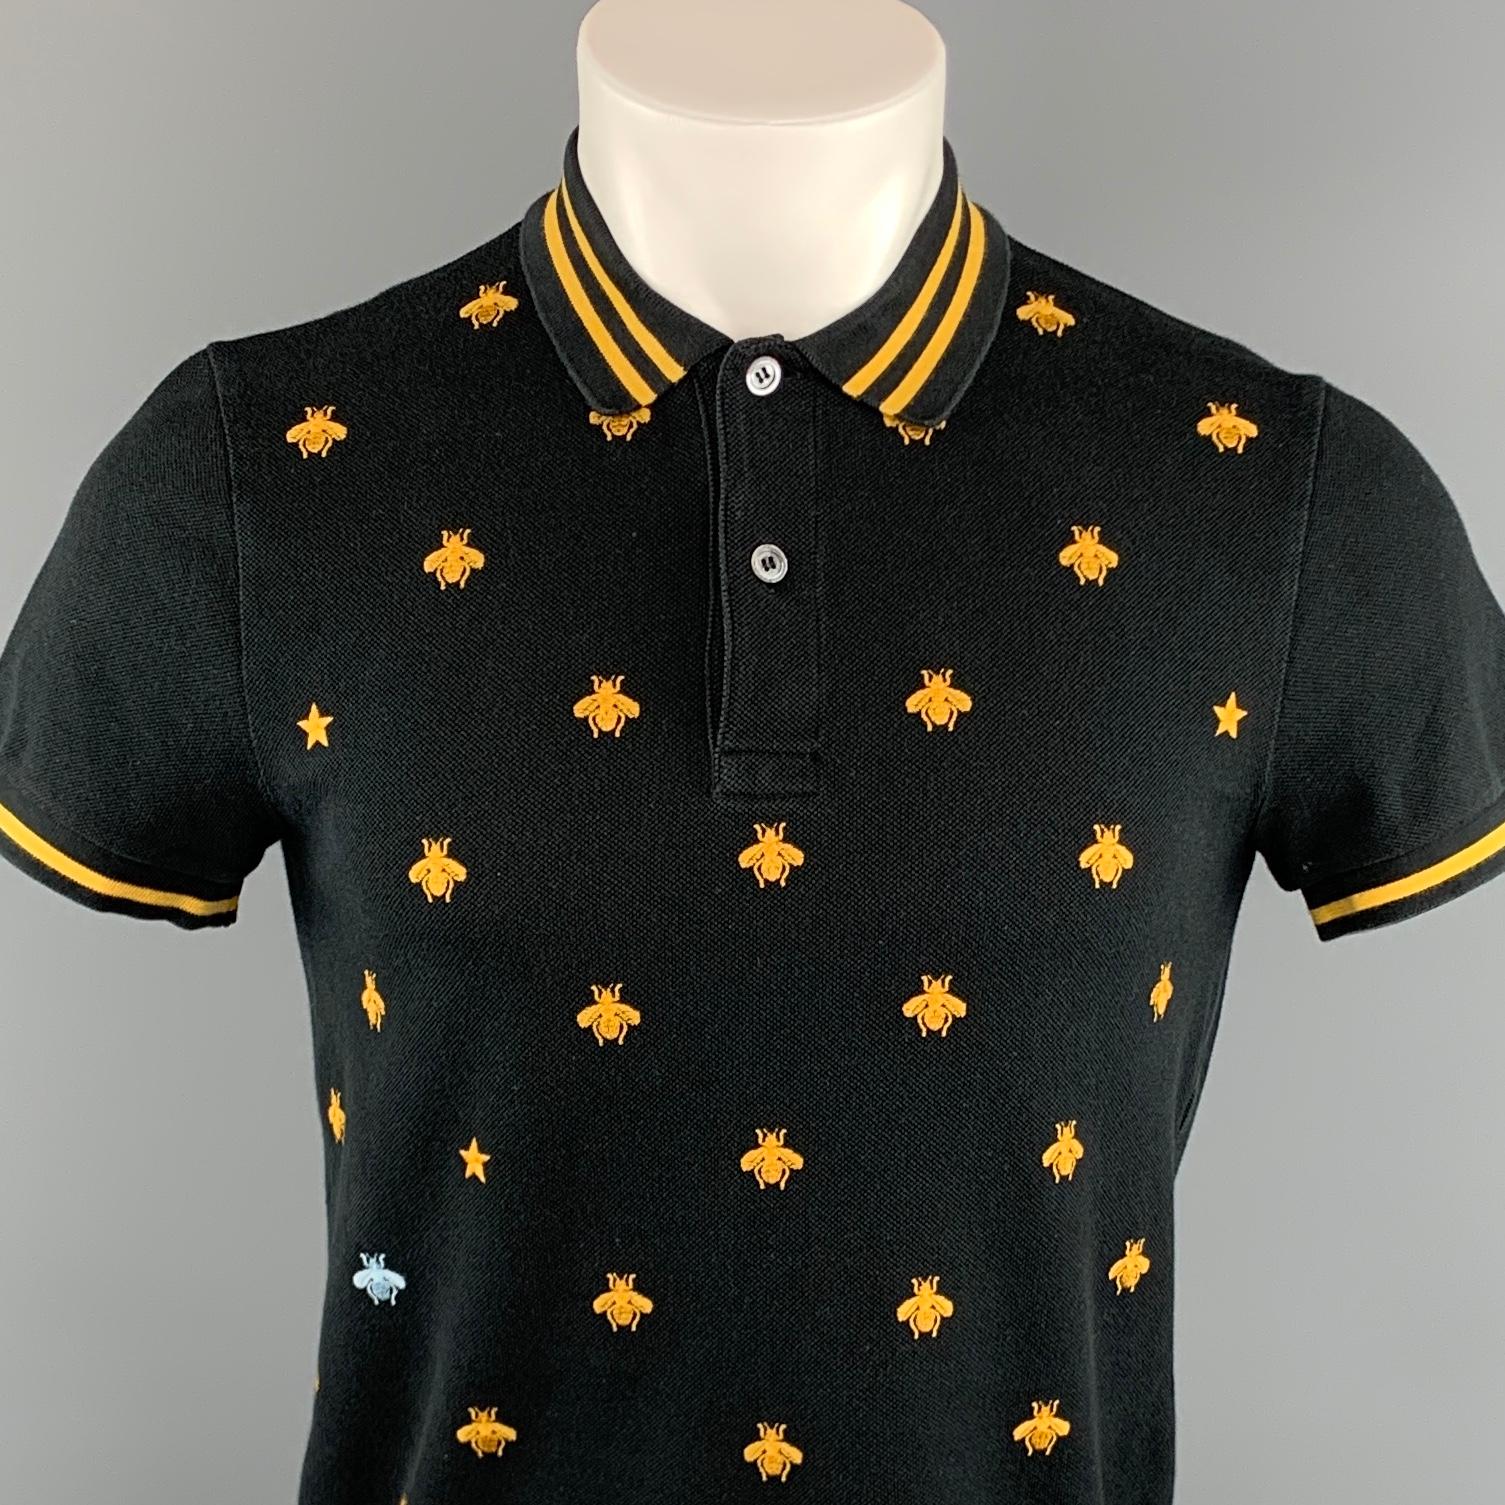 GUCCI polo comes in black cotton featuring a front all over bee embroidery pattern, stripe collar trim detail, and a buttoned closure. Made in Italy.
 
Very Good Pre-Owned Condition.
Marked: S
 
Measurements:
 
Shoulder: 17.5 in.
Chest: 41